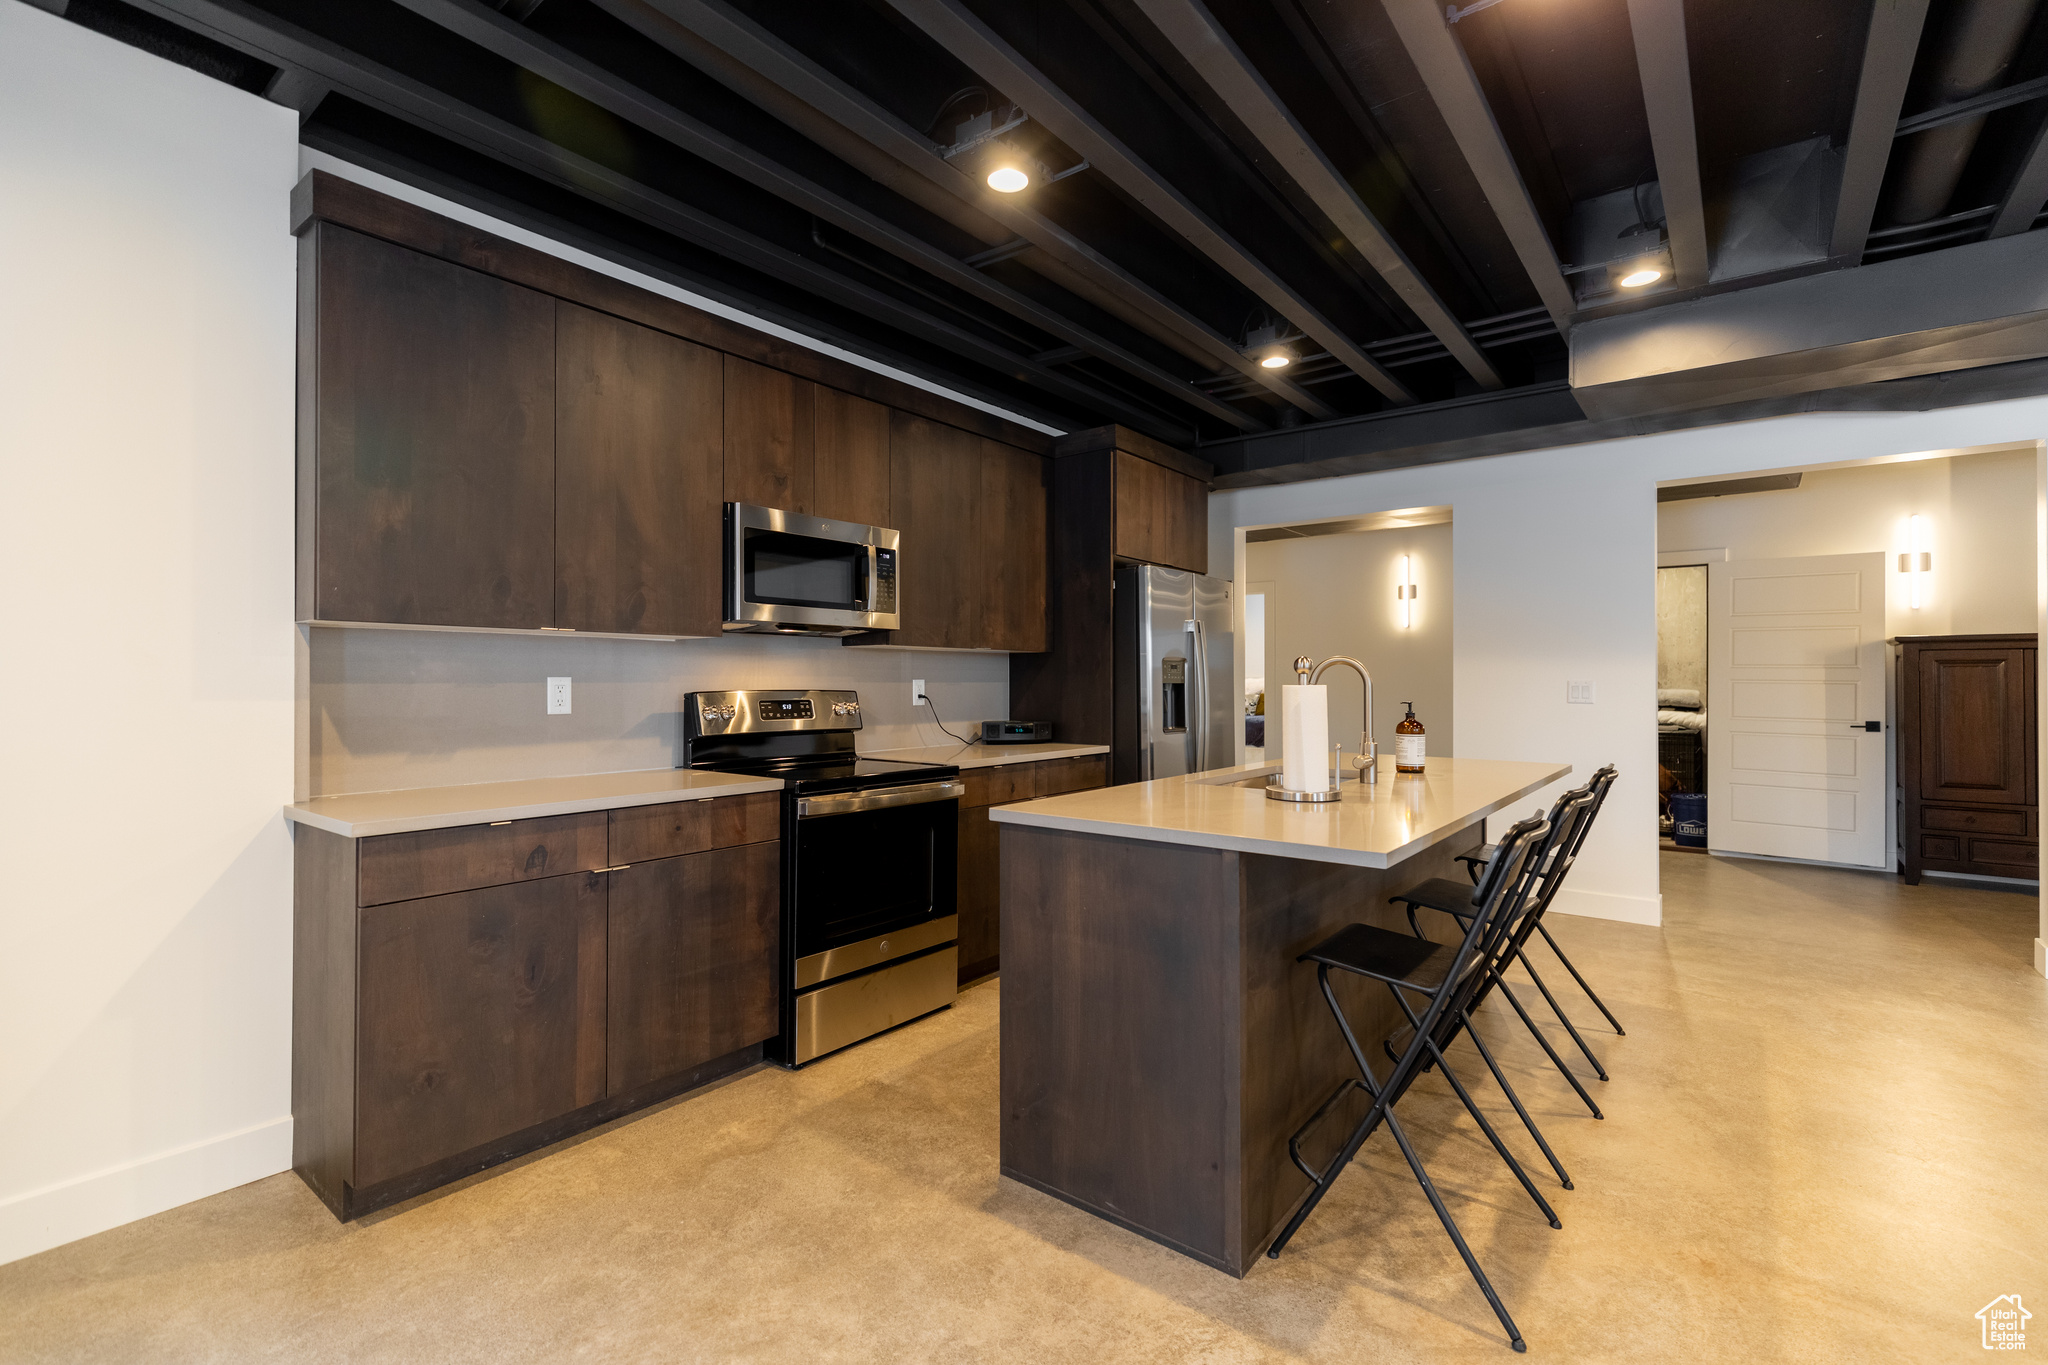 Kitchen with a center island with sink, stainless steel appliances, sink, a breakfast bar area, and dark brown cabinets